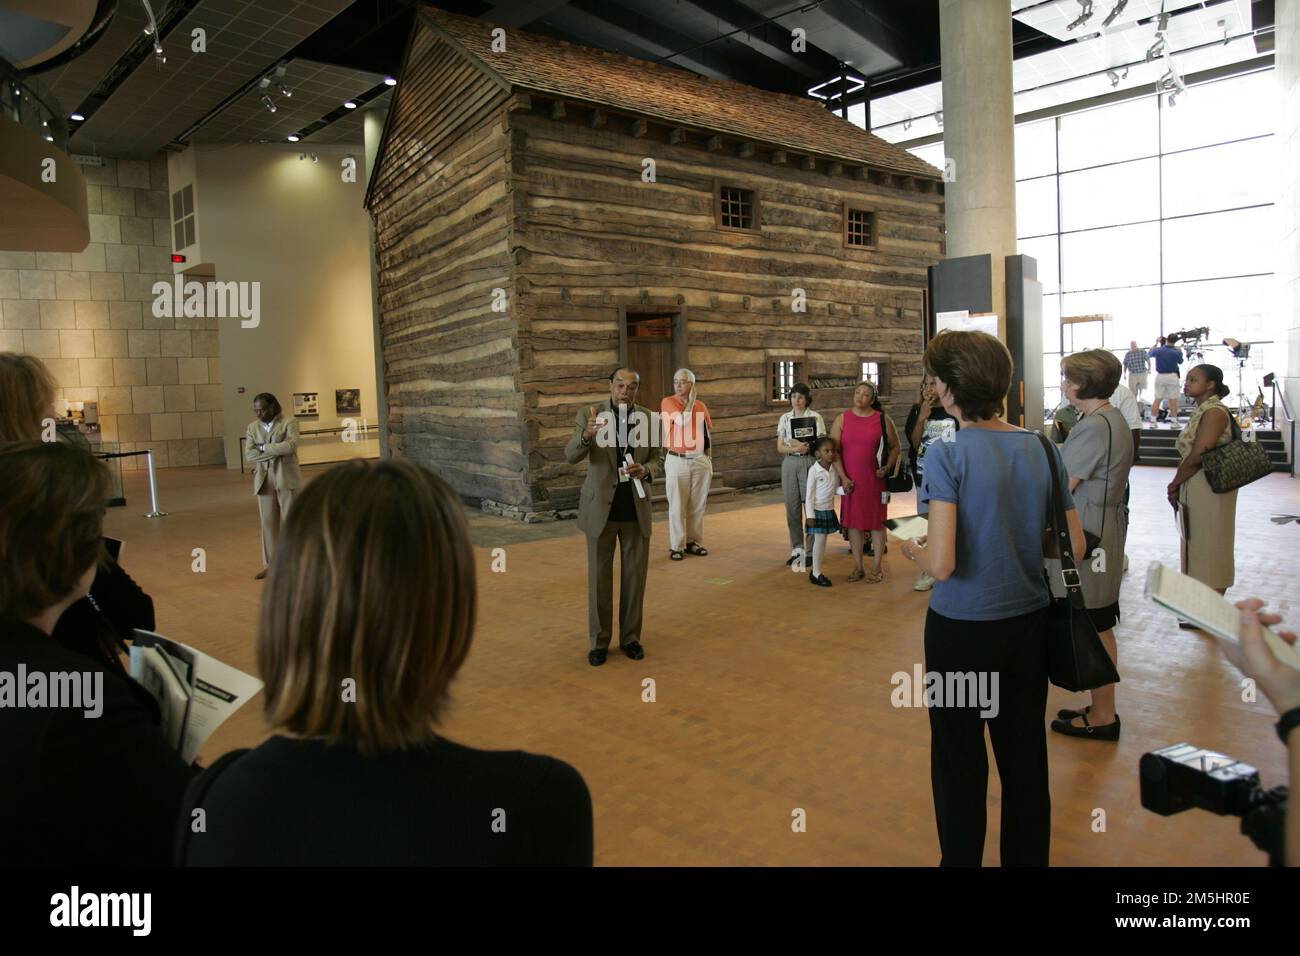 Ohio River Scenic Byway - Slave Pen Exhibit. National Underground Railroad Freedom Center patrons learn more about a slave pen, which was used to hold slaves being transported further south before the Civil War. Location: cincinnati, Ohio (39.097° N 84.511° W) Stock Photo